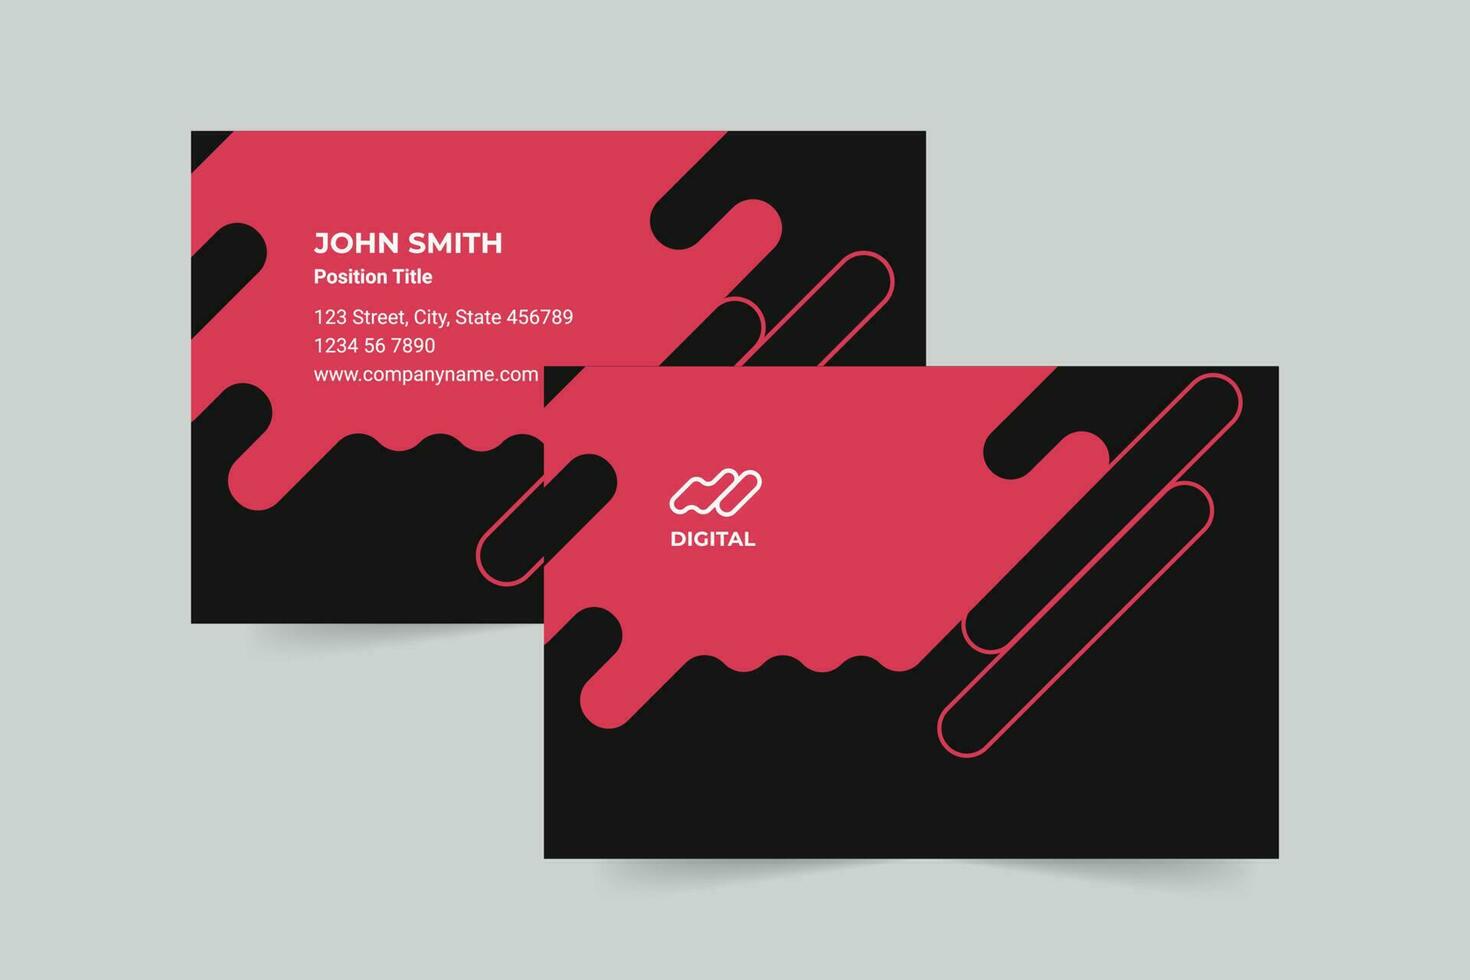 Digital Advertising Agency business card template. A clean, modern, and high-quality design business card vector design. Editable and customize template business card